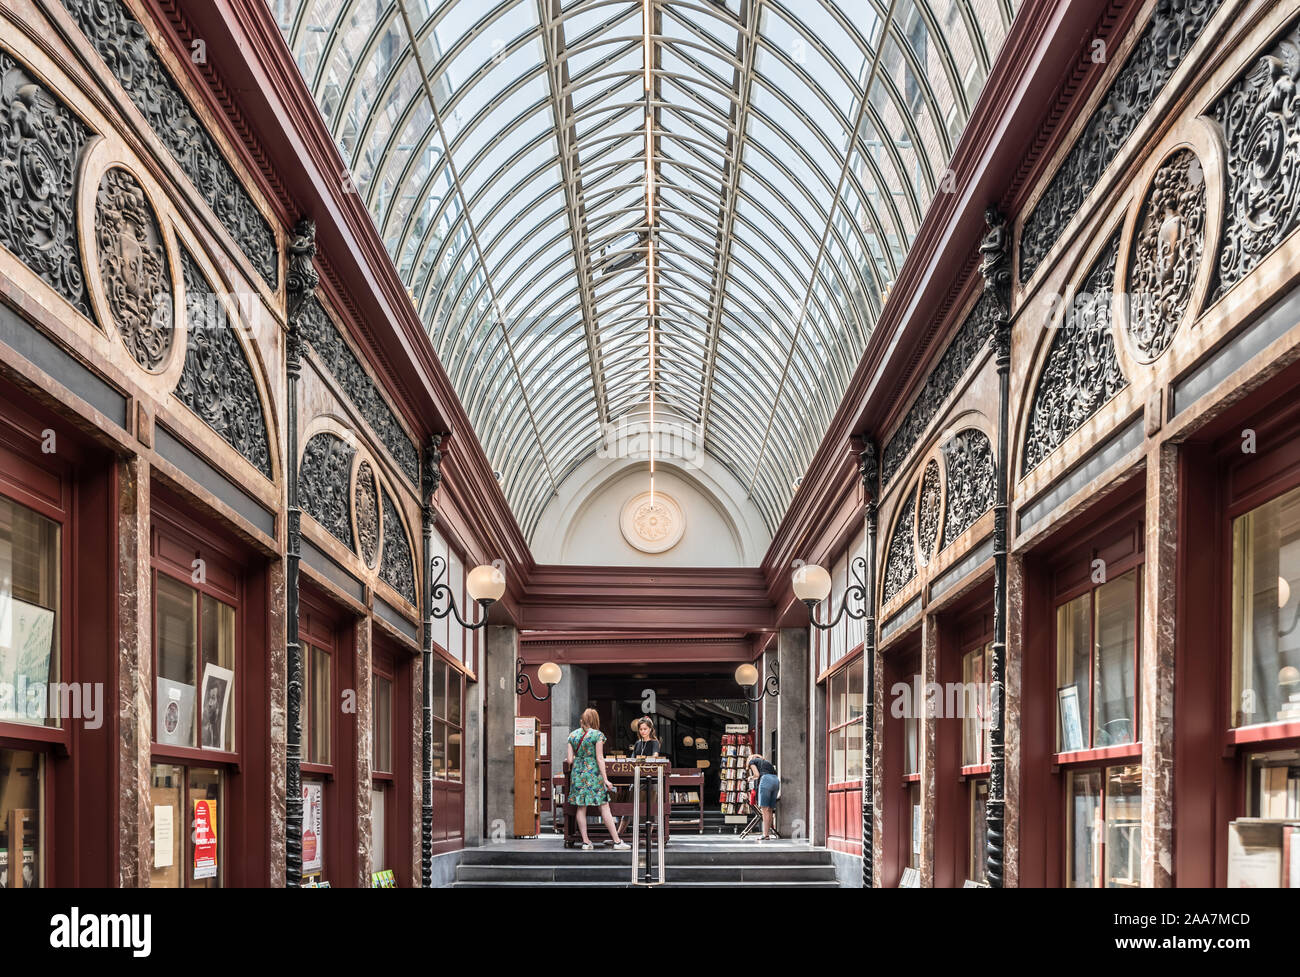 Brussels Old Town / Belgium - 06 25 2019: Decorated arcades and hall of the Genicot Library in the Bortier Gallery in Art Nouveau and neo Renaissance Stock Photo